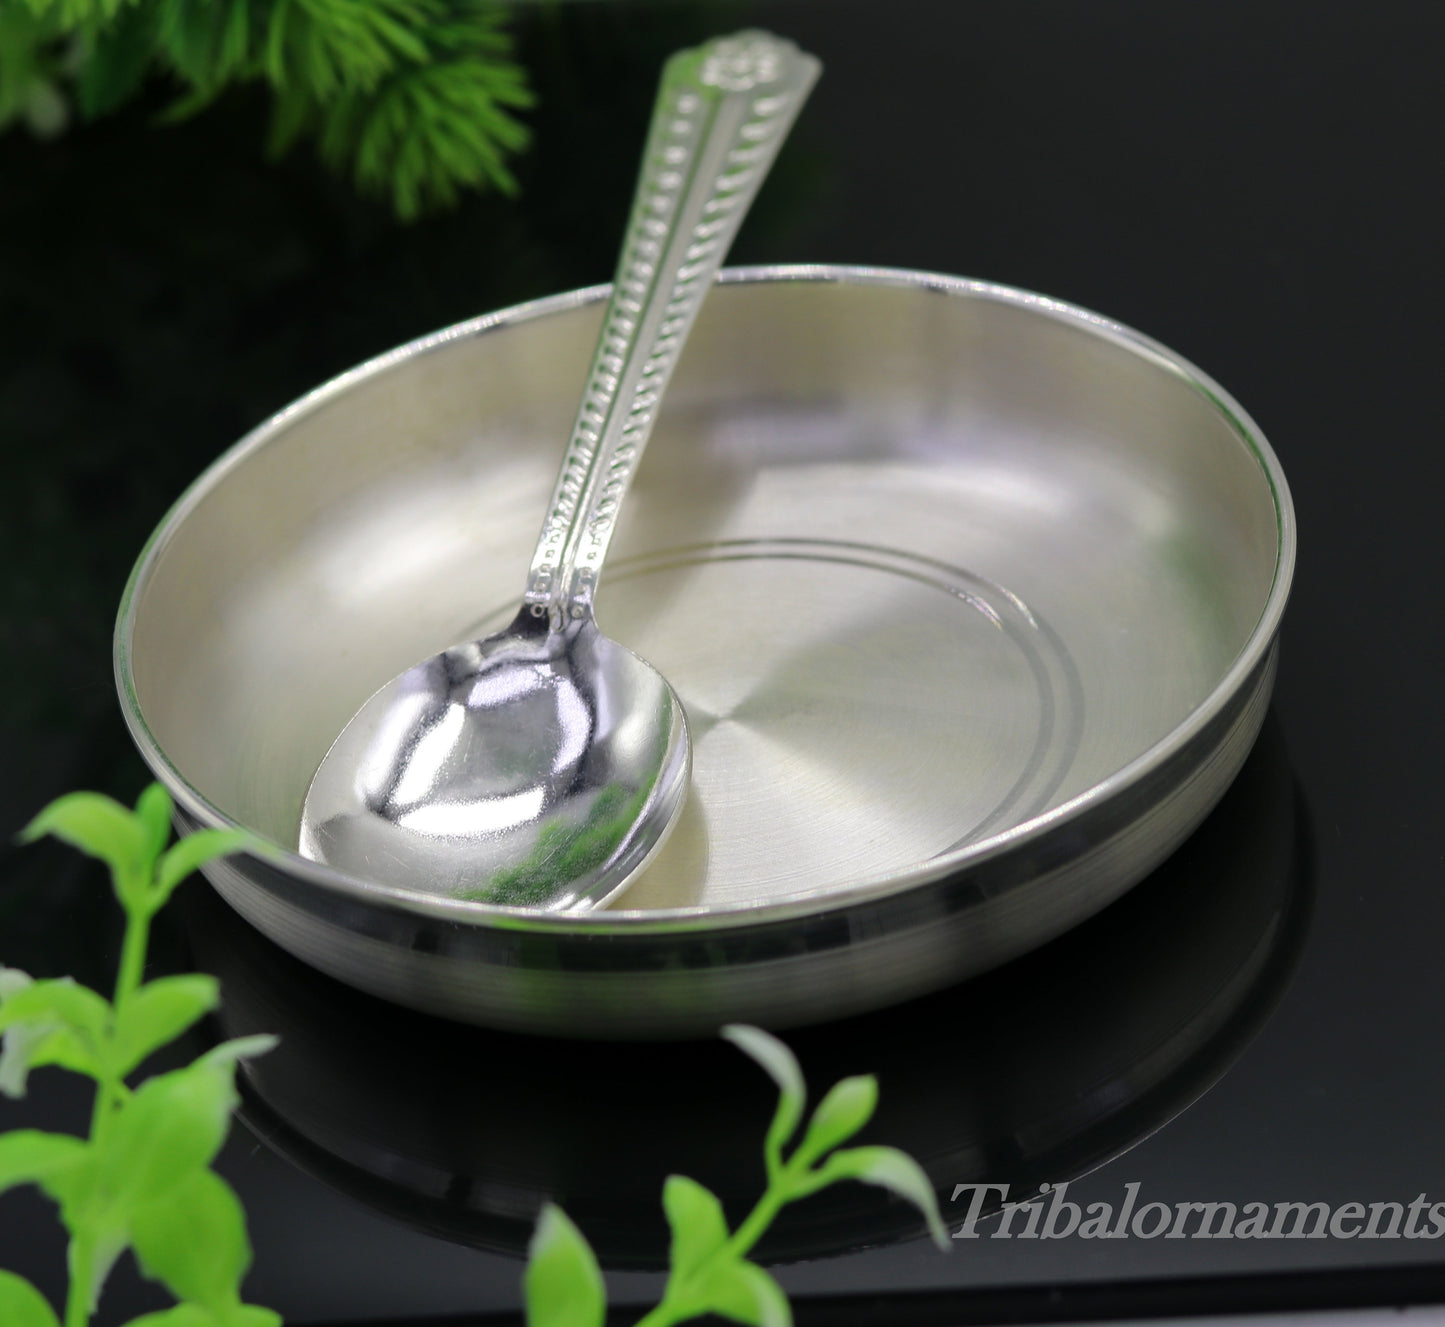 Handmade 999 fine solid silver plate tray for baby food, pure silver vessels, silver utensils, home and kitchen accessories sv26 - TRIBAL ORNAMENTS